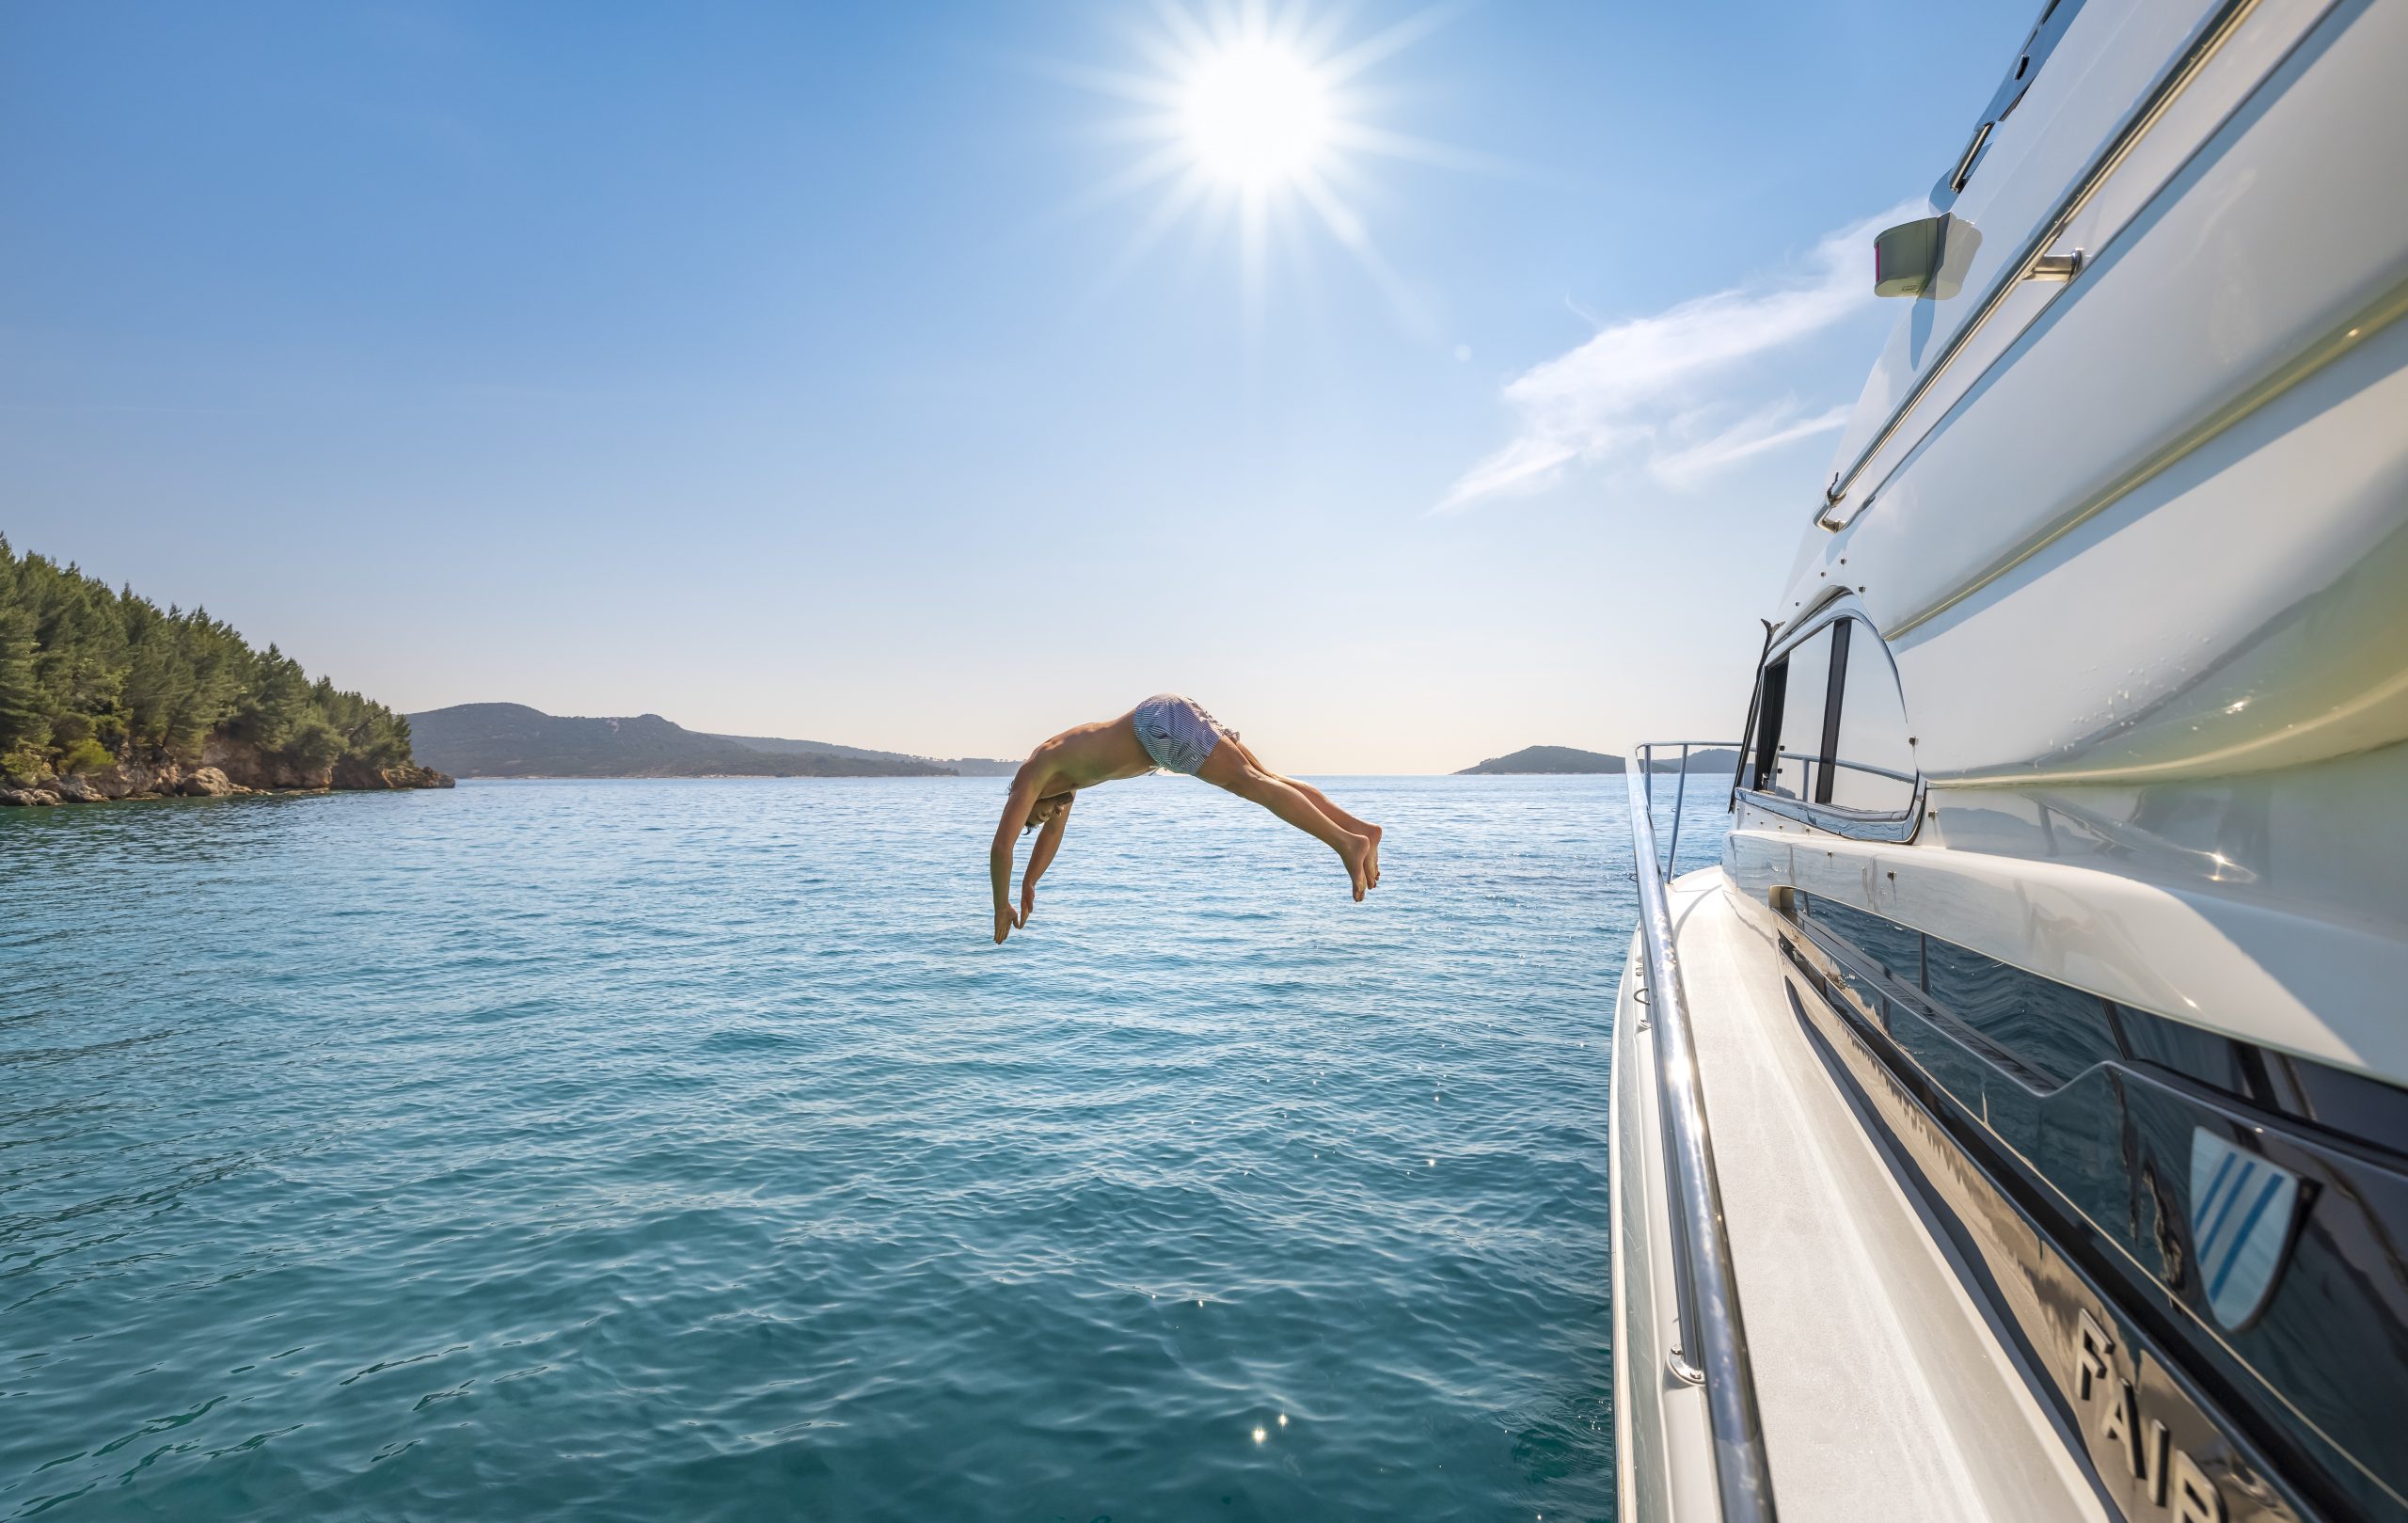 jumping of board a yahct, renting a yacht, yacht charter dubrovnik, dubrovnik yacht rent